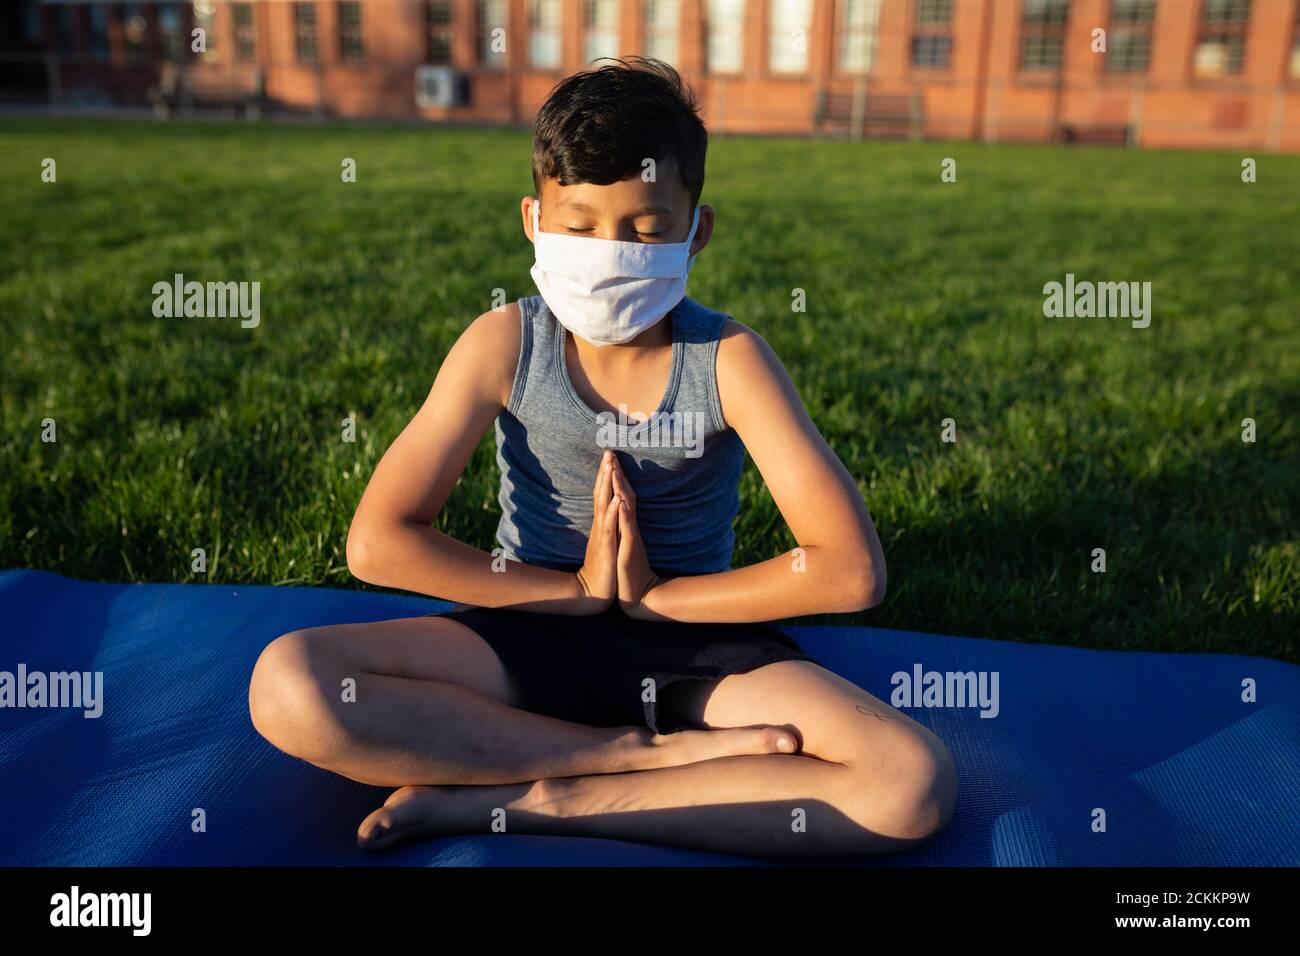 Boy wearing face mask performing yoga in the garden Stock Photo